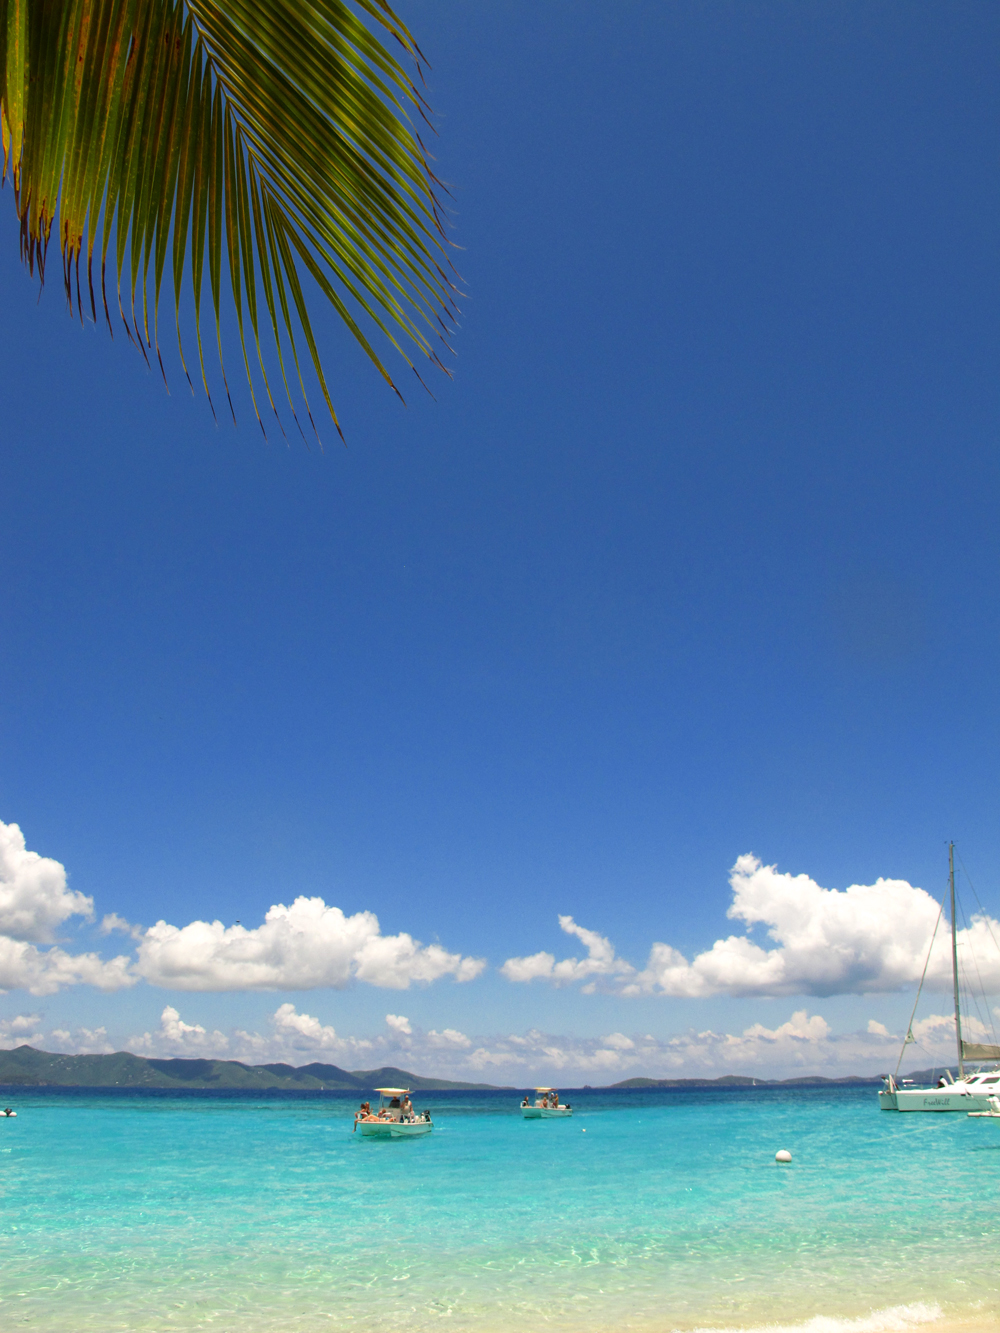 Looking out at Tortola from Jost Van Dyke